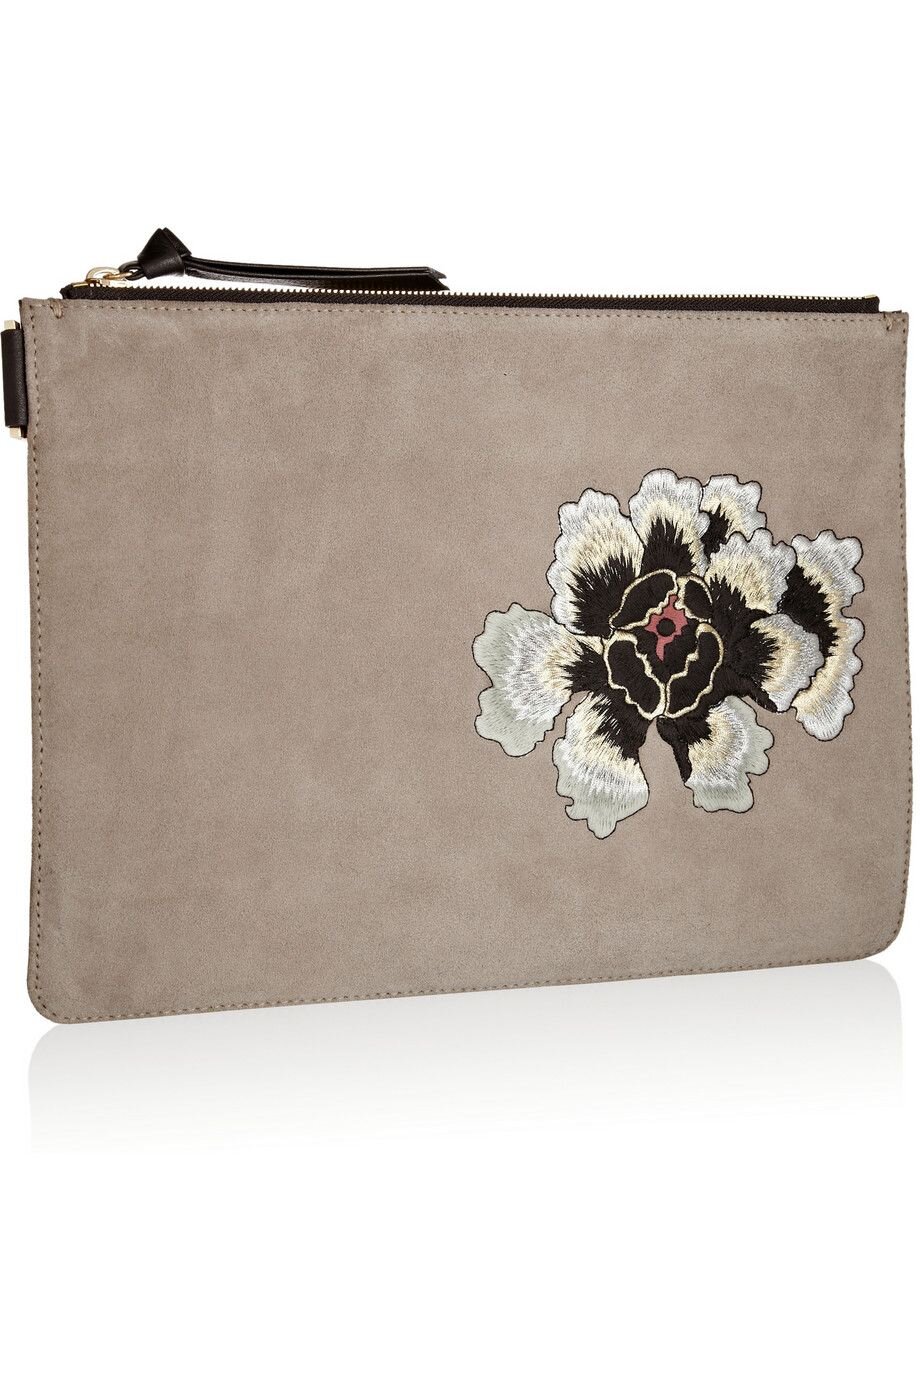 Gray M embroidered suede and leather clutch _ NewbarK.jpeg